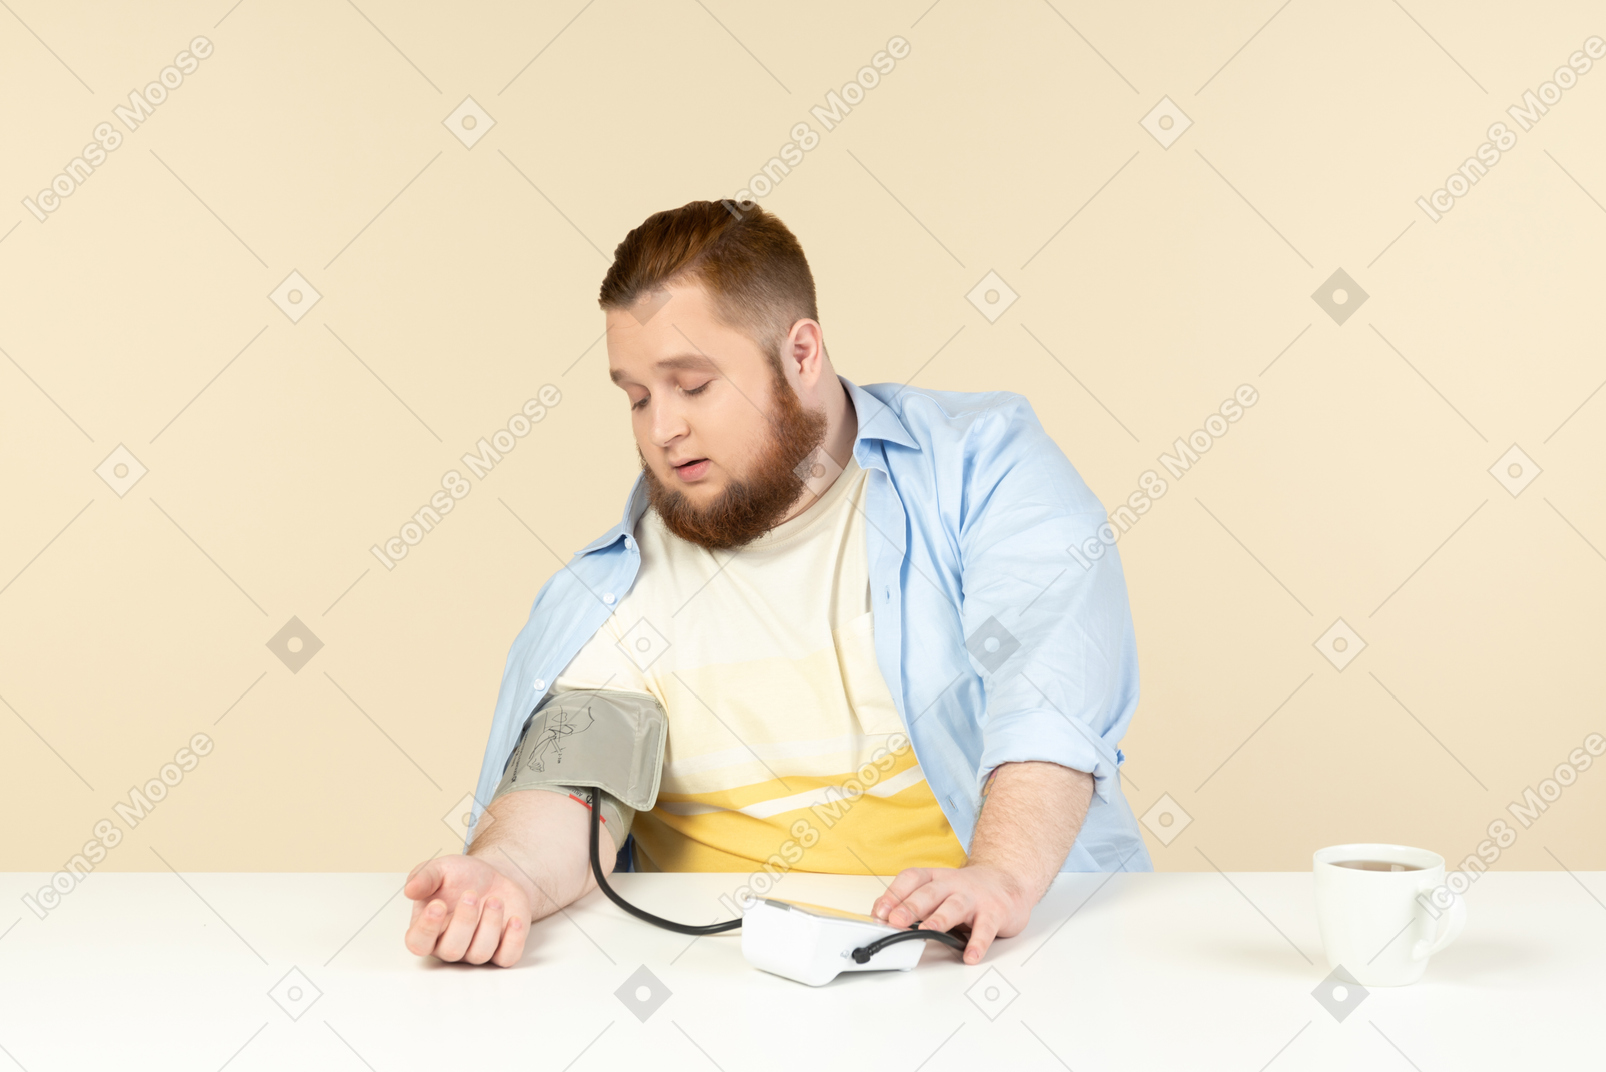 Worried looking young overweight man sitting at the table and blood checking pressure